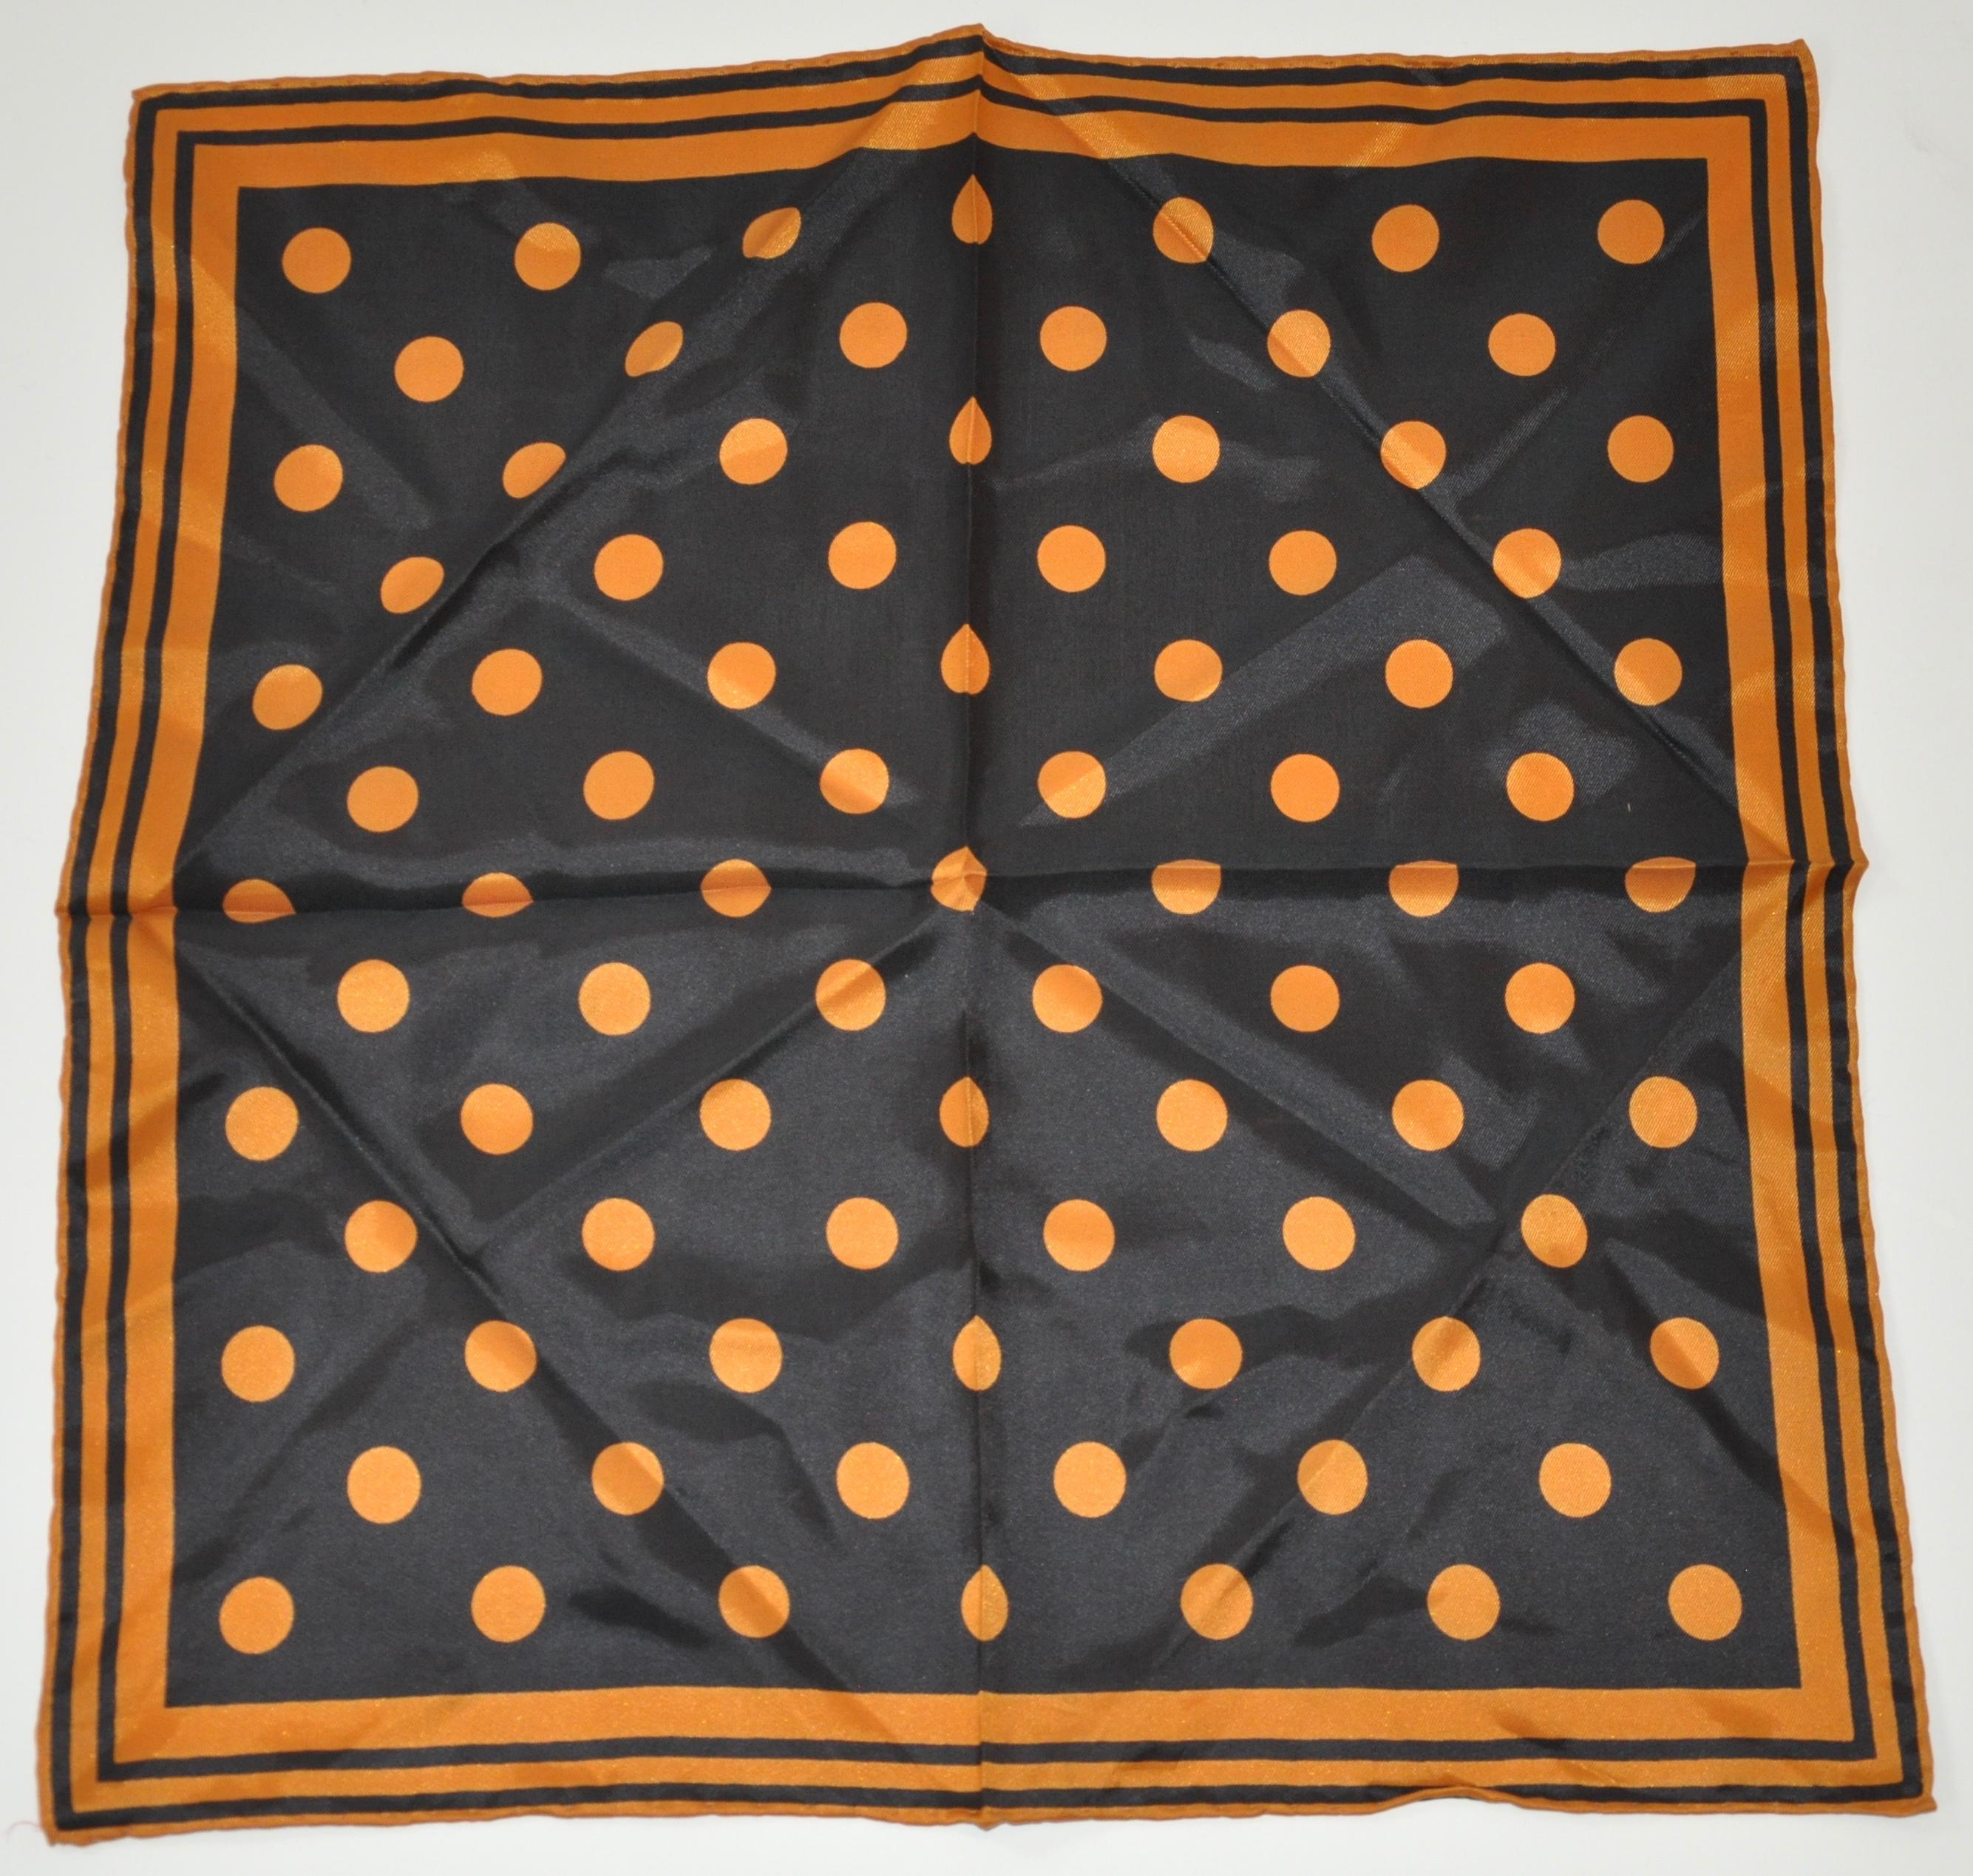     Wonderfully elegant with golden bronze and midnight black polka dot handkerchief finished with hand-rolled edges silk handkerchief, measures 18 inches by 18 inches. Made in Italy.